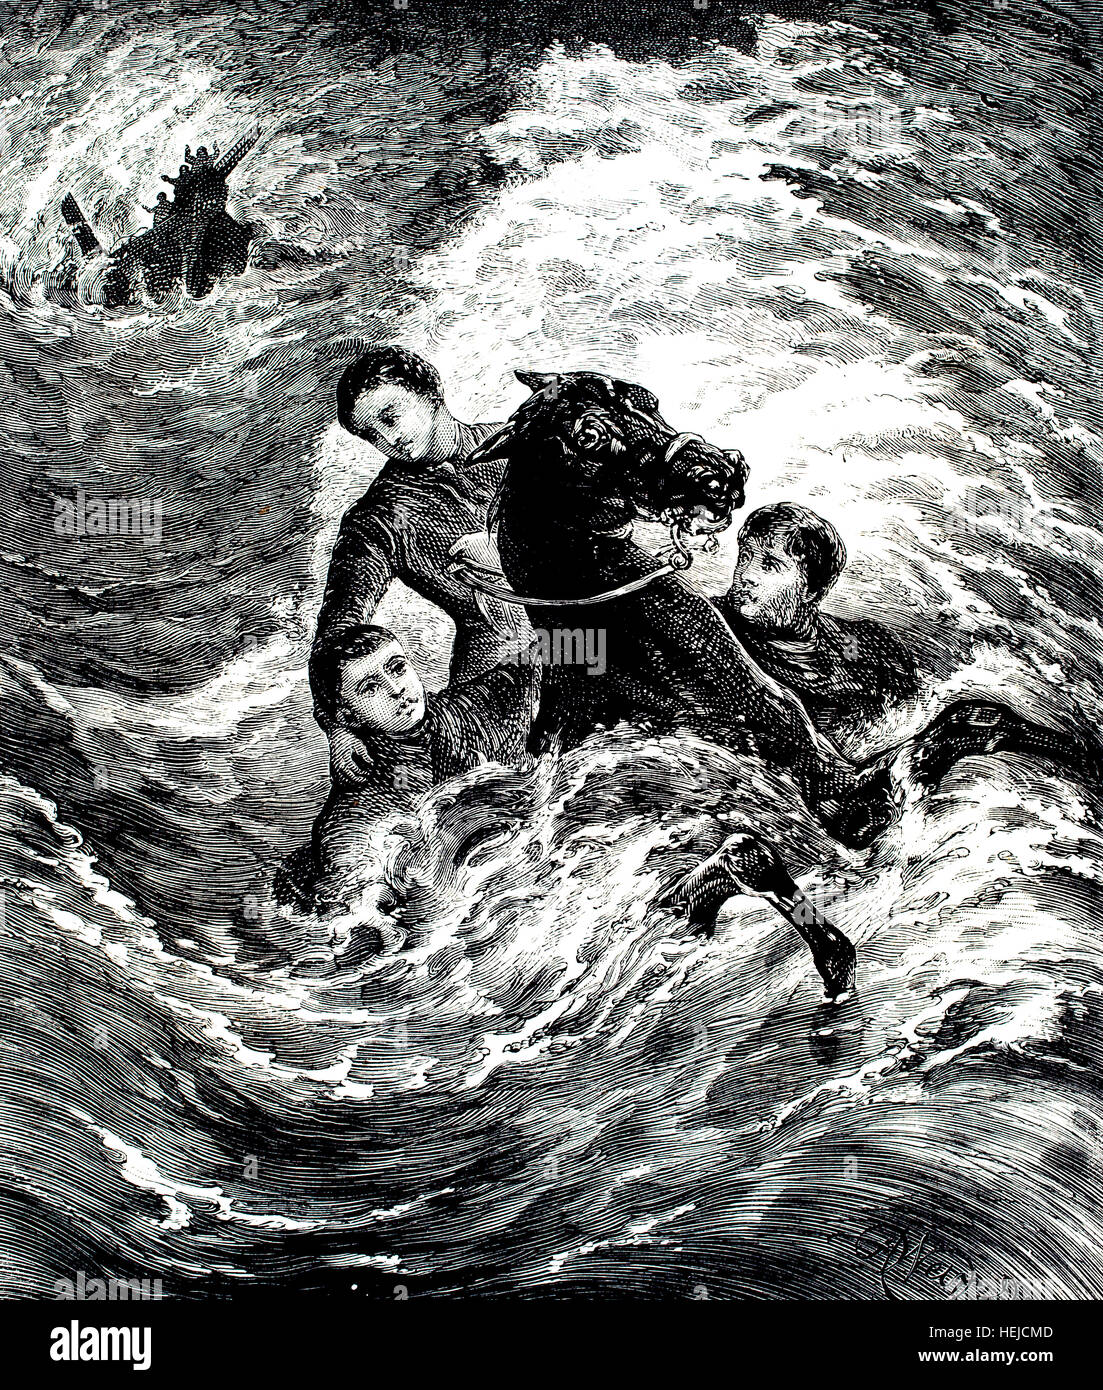 Rescuing Sailors from the Wreck, rescue scene of Cape of Good Hope, illustration from 1884 Chatterbox weekly children’s paper Stock Photo